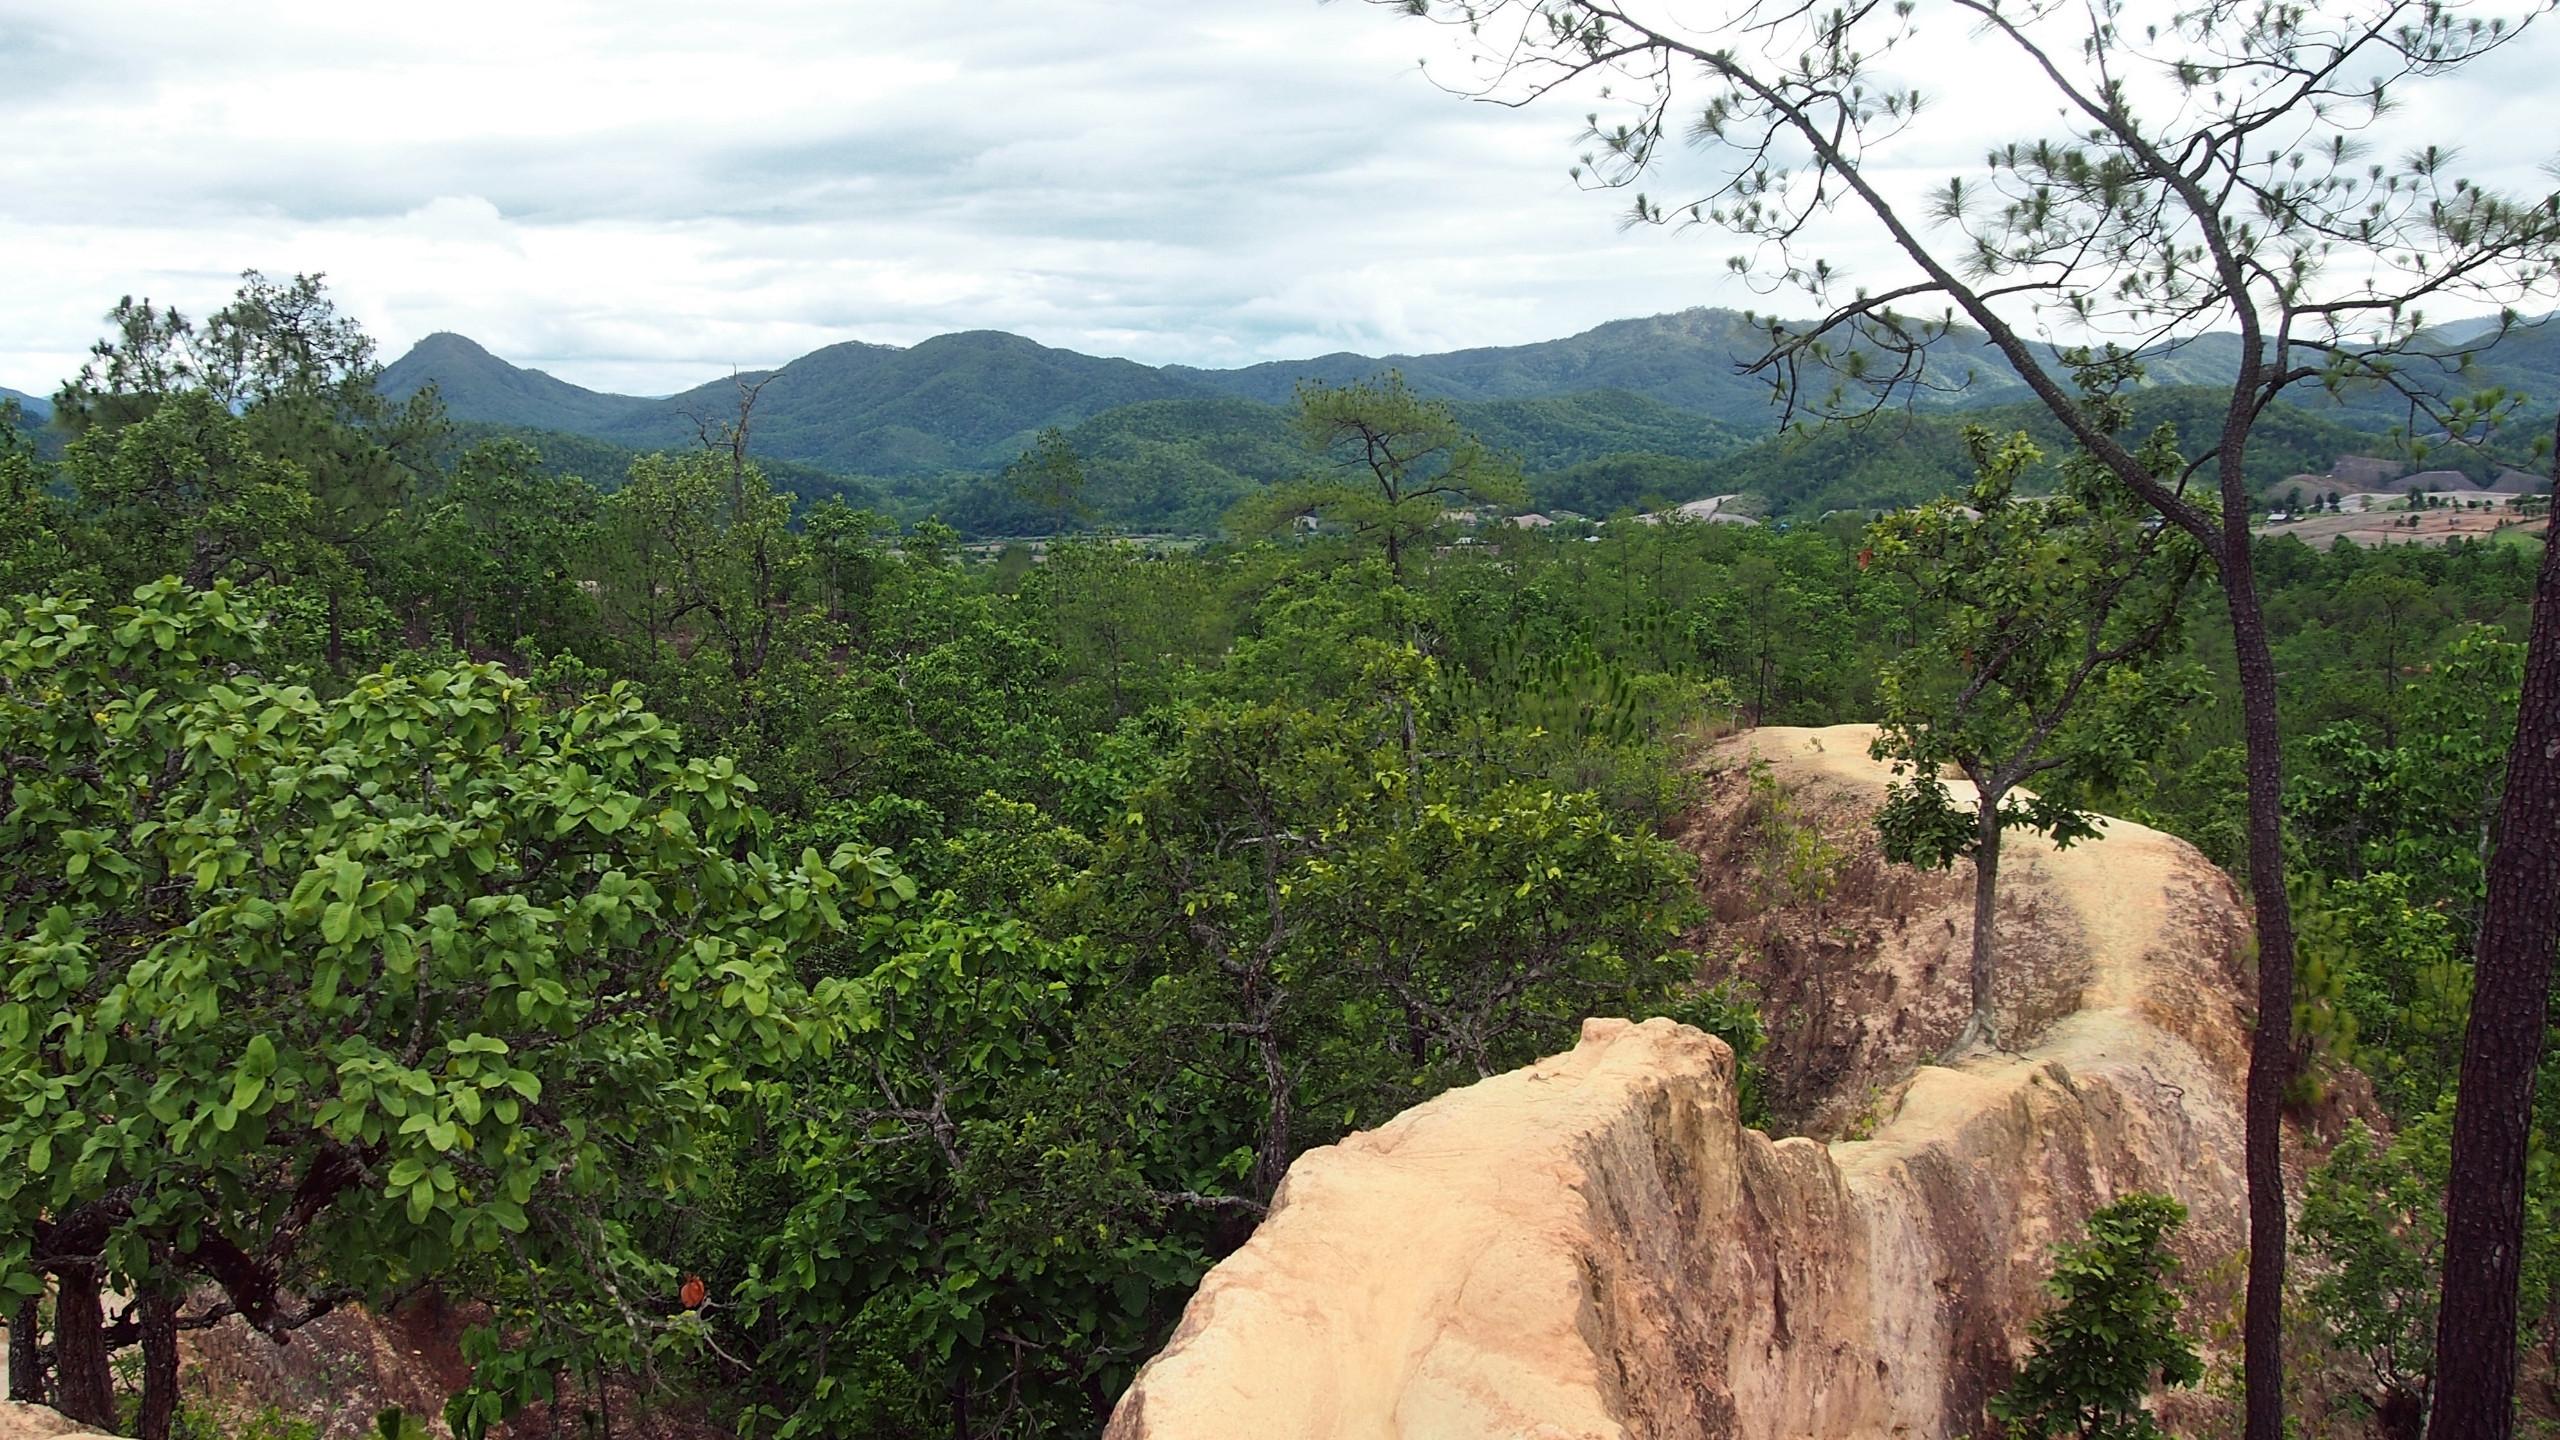 Pai canyon, in Pai, Thailand